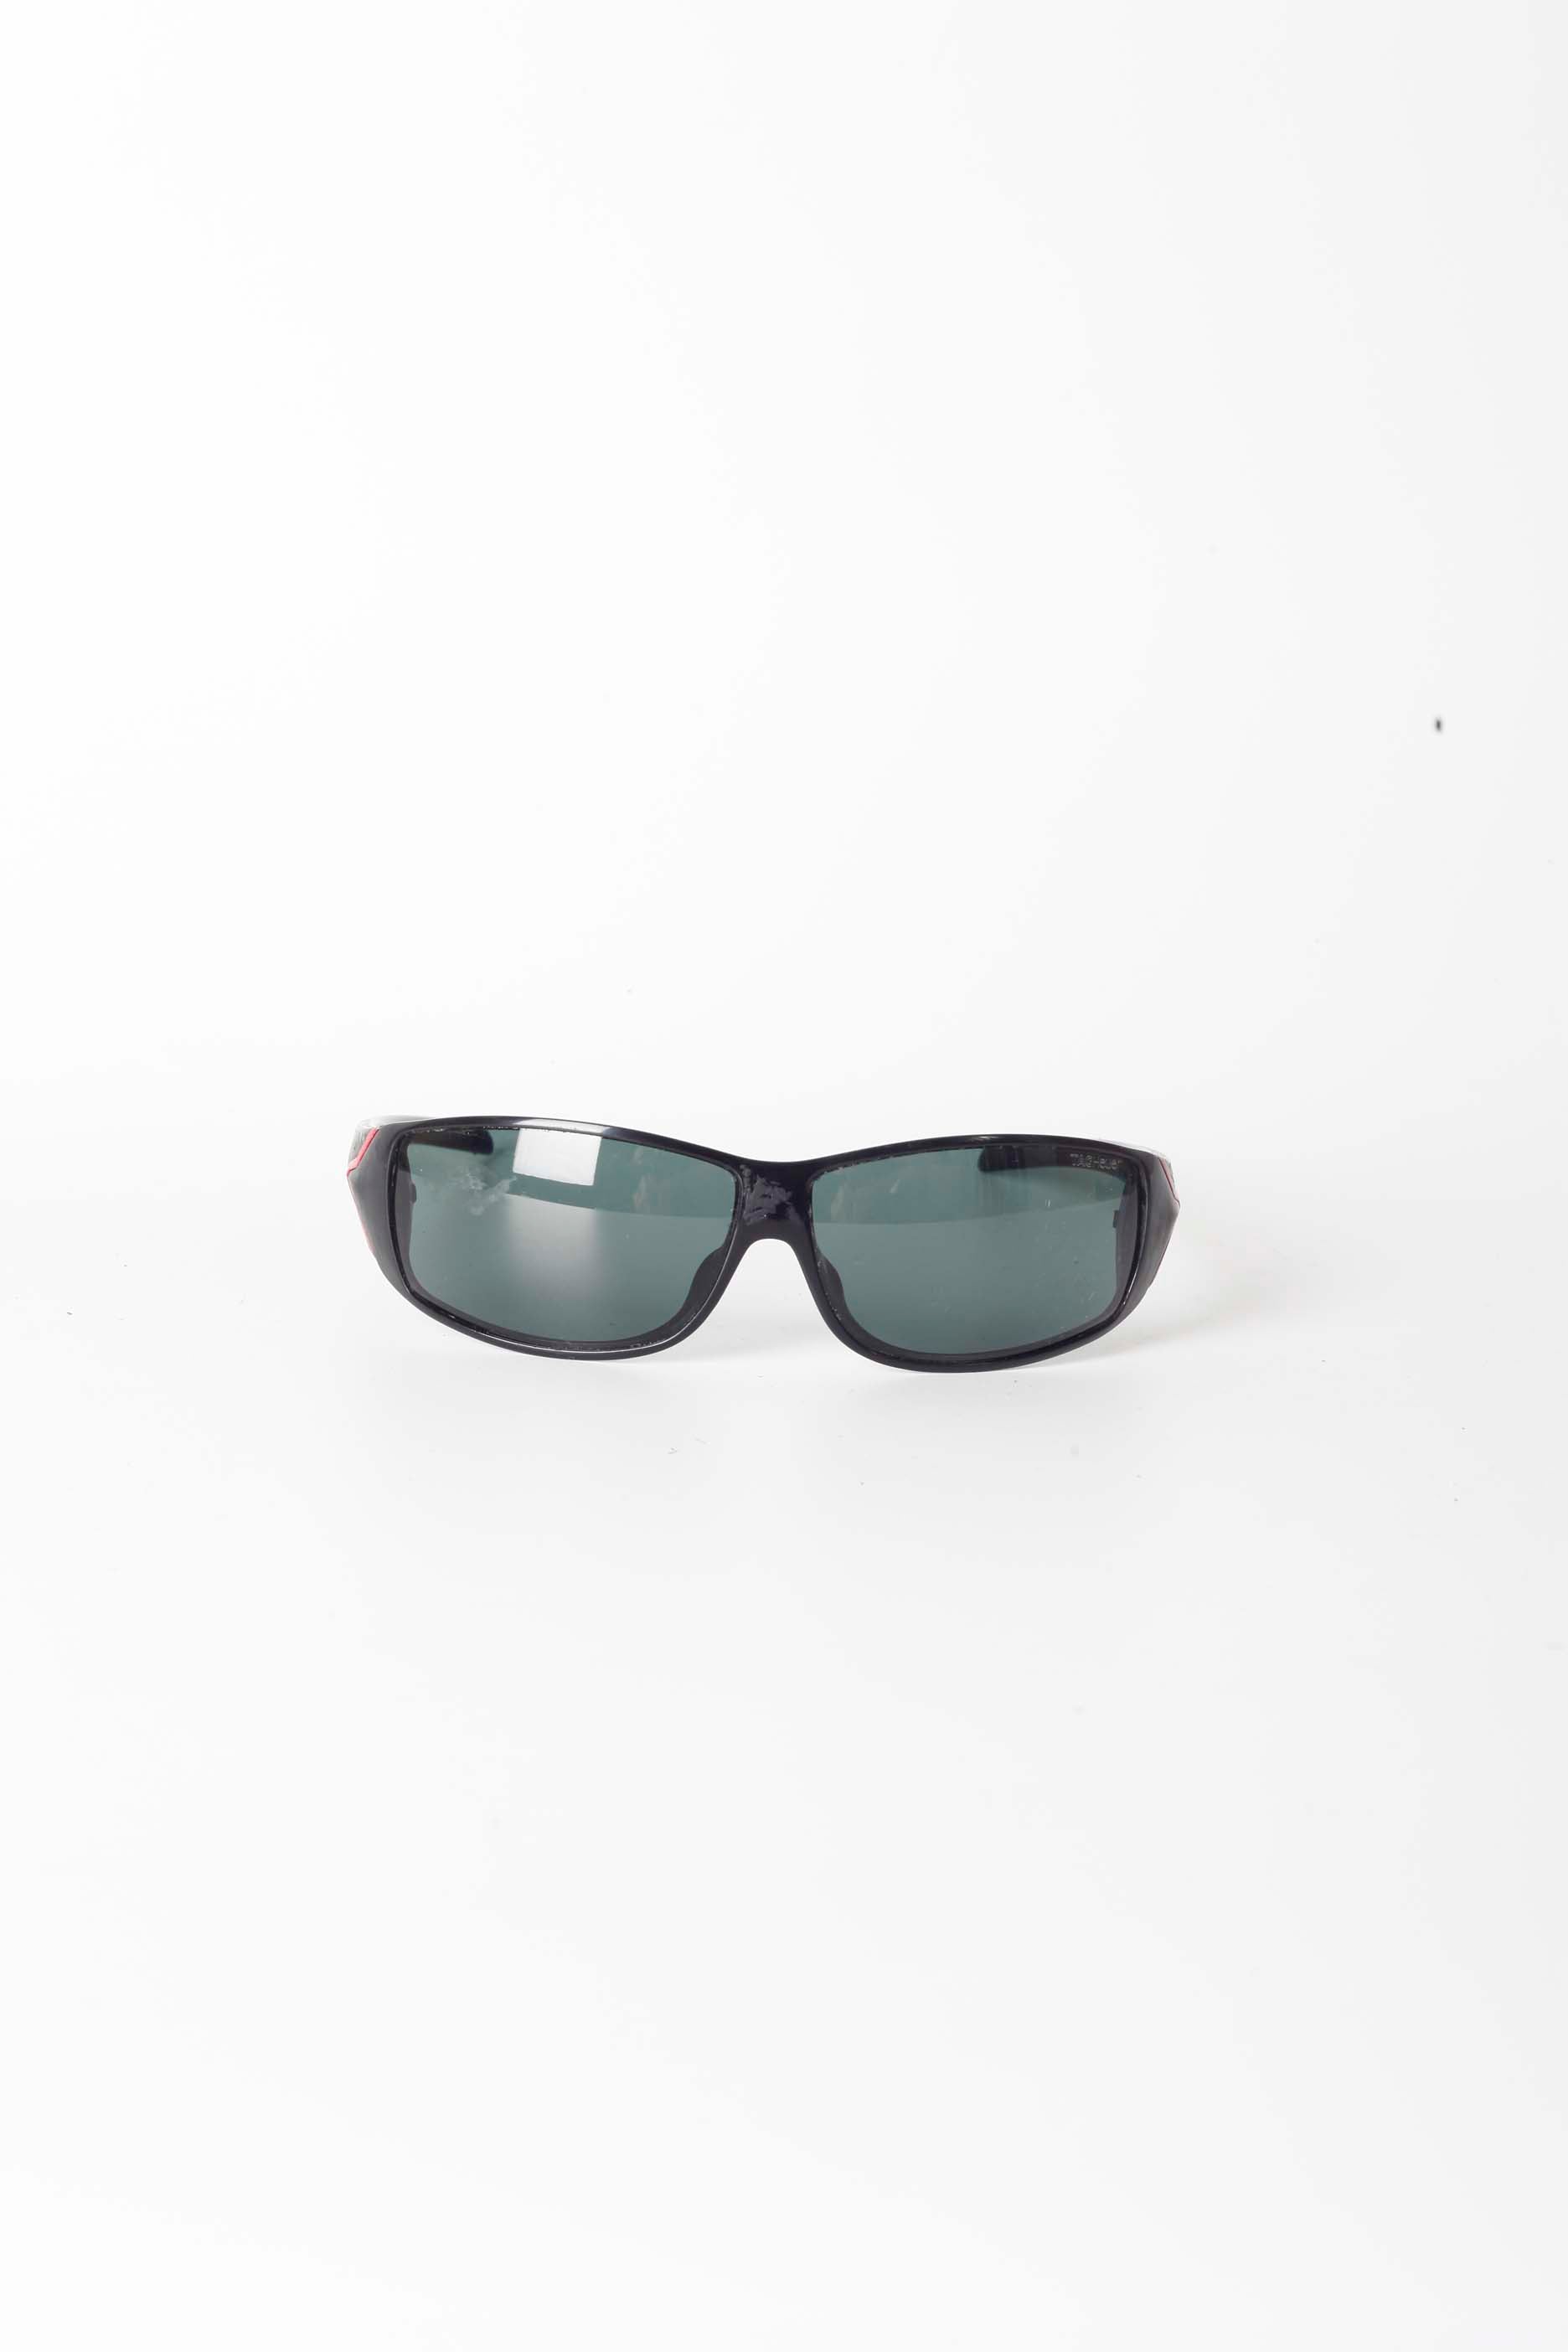 Black Wrap Around Sunglasses with Red Detail